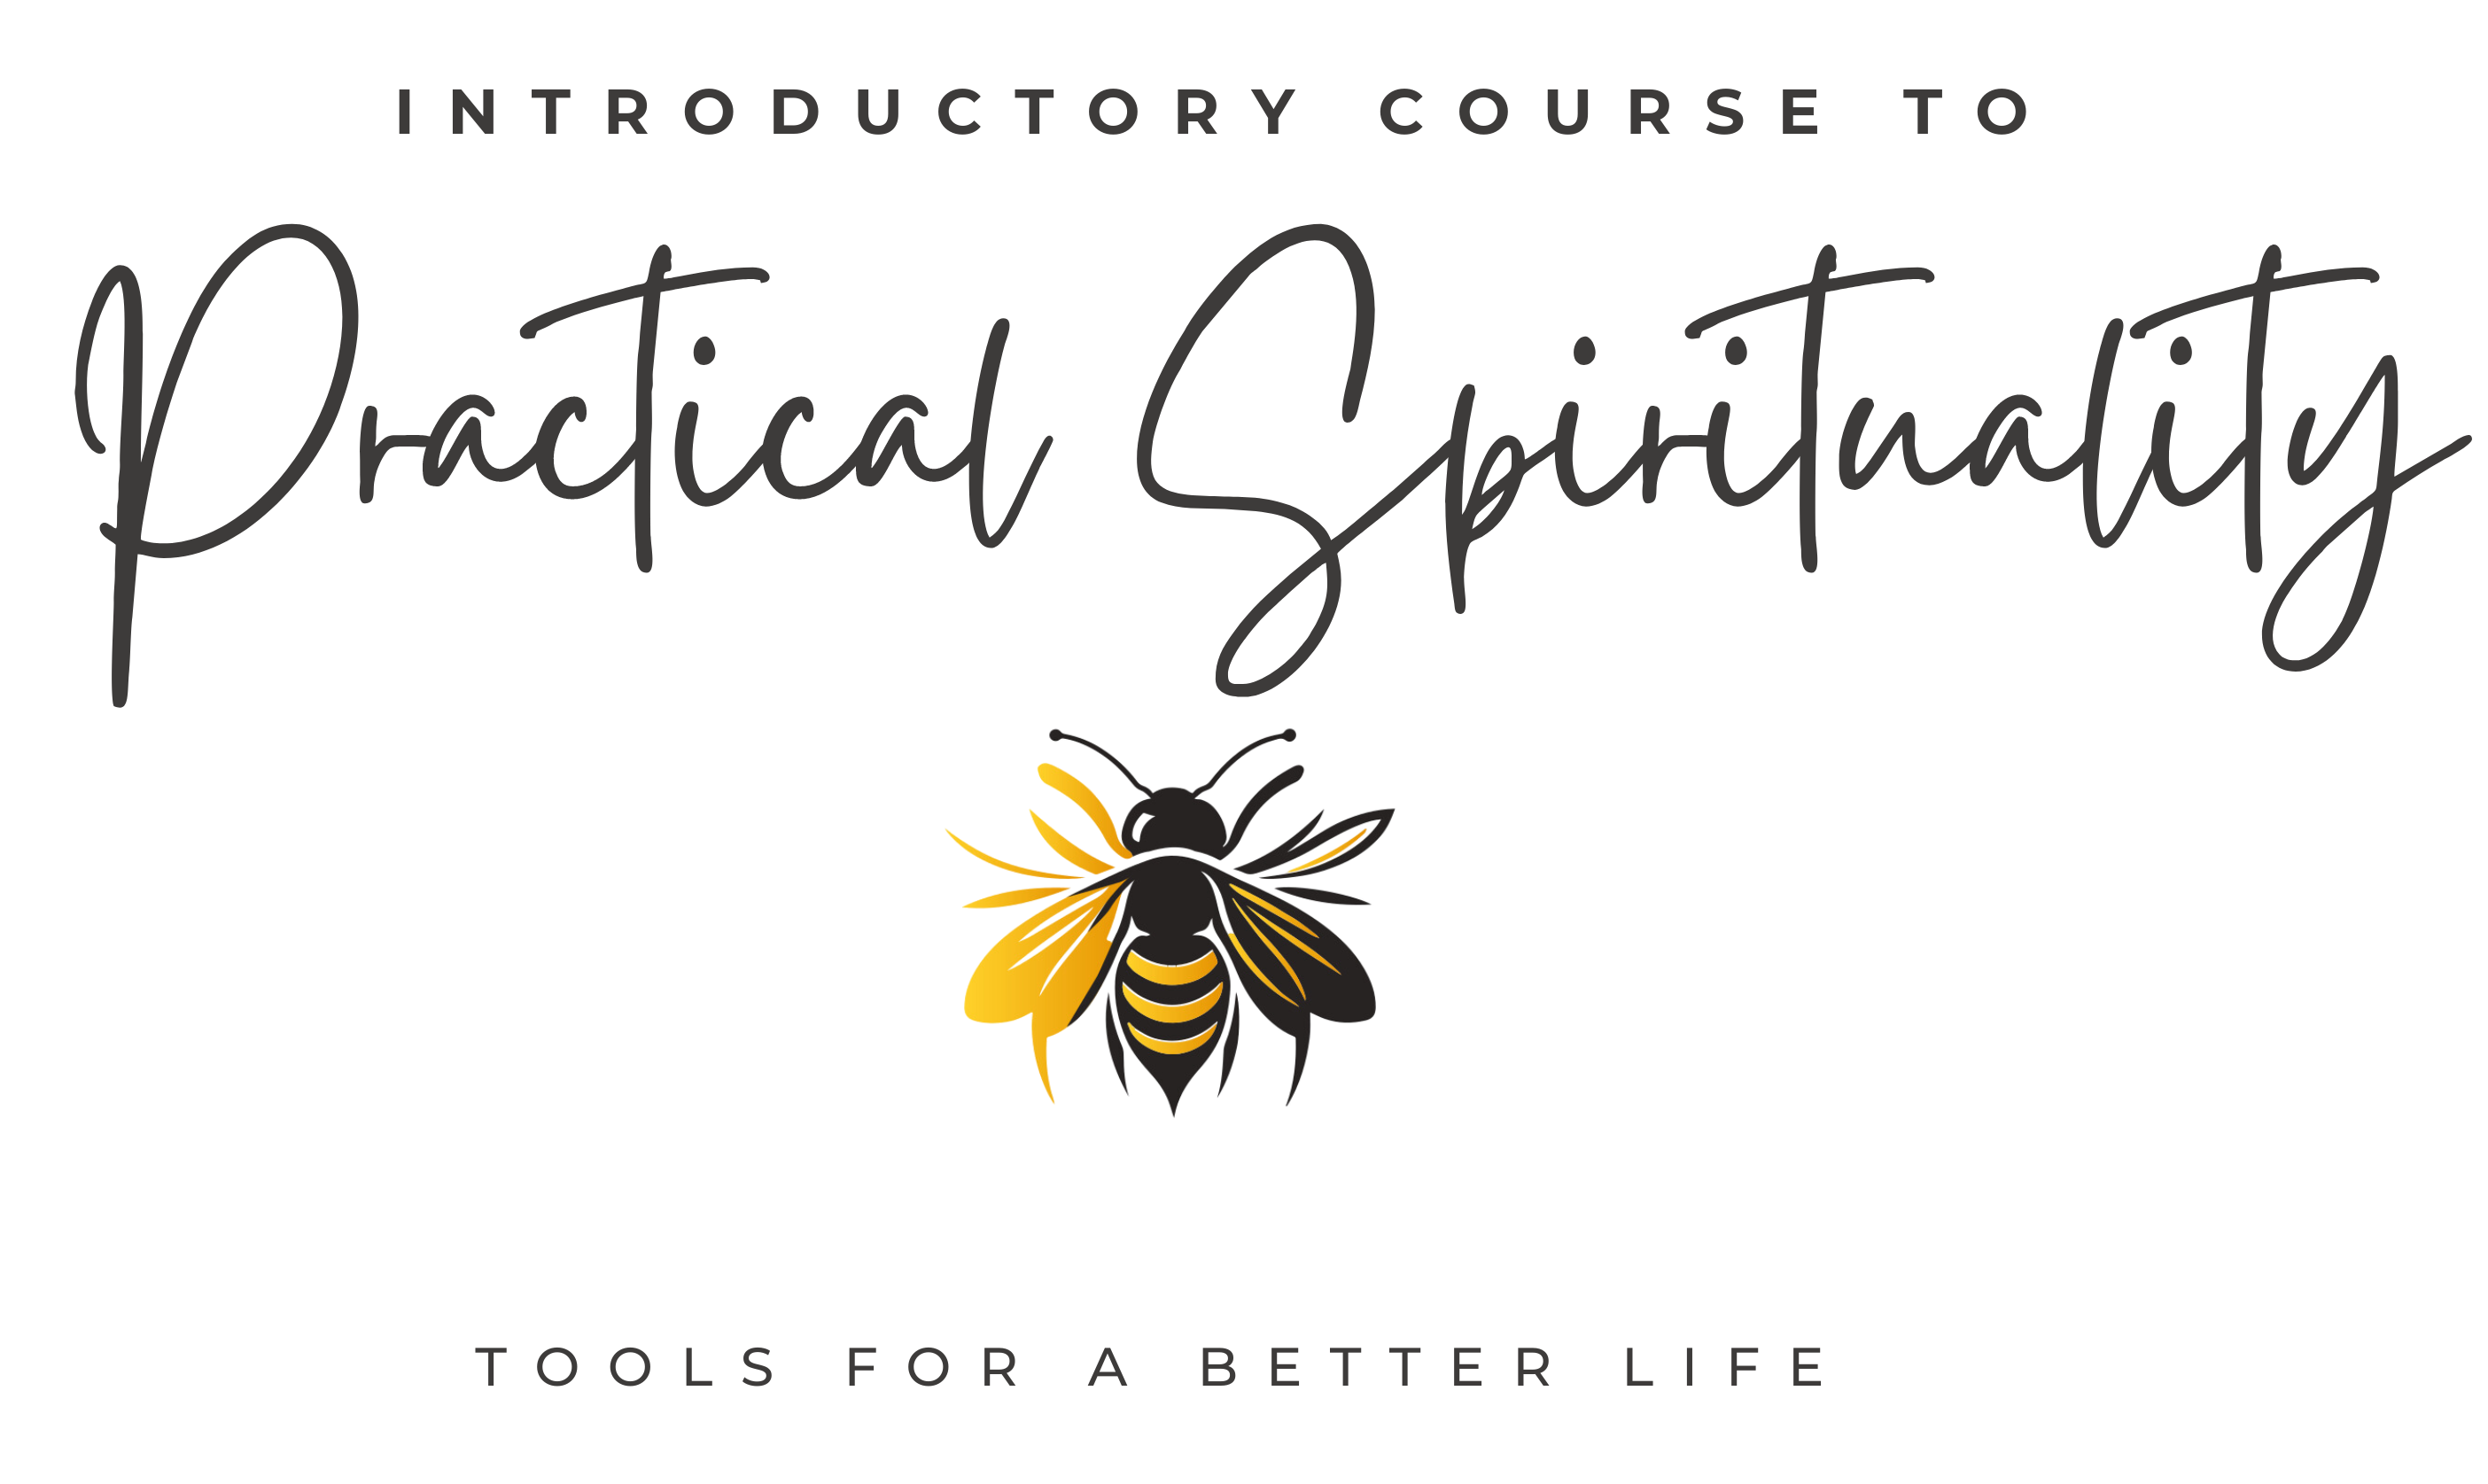 Introductory Course to Practical Spirituality